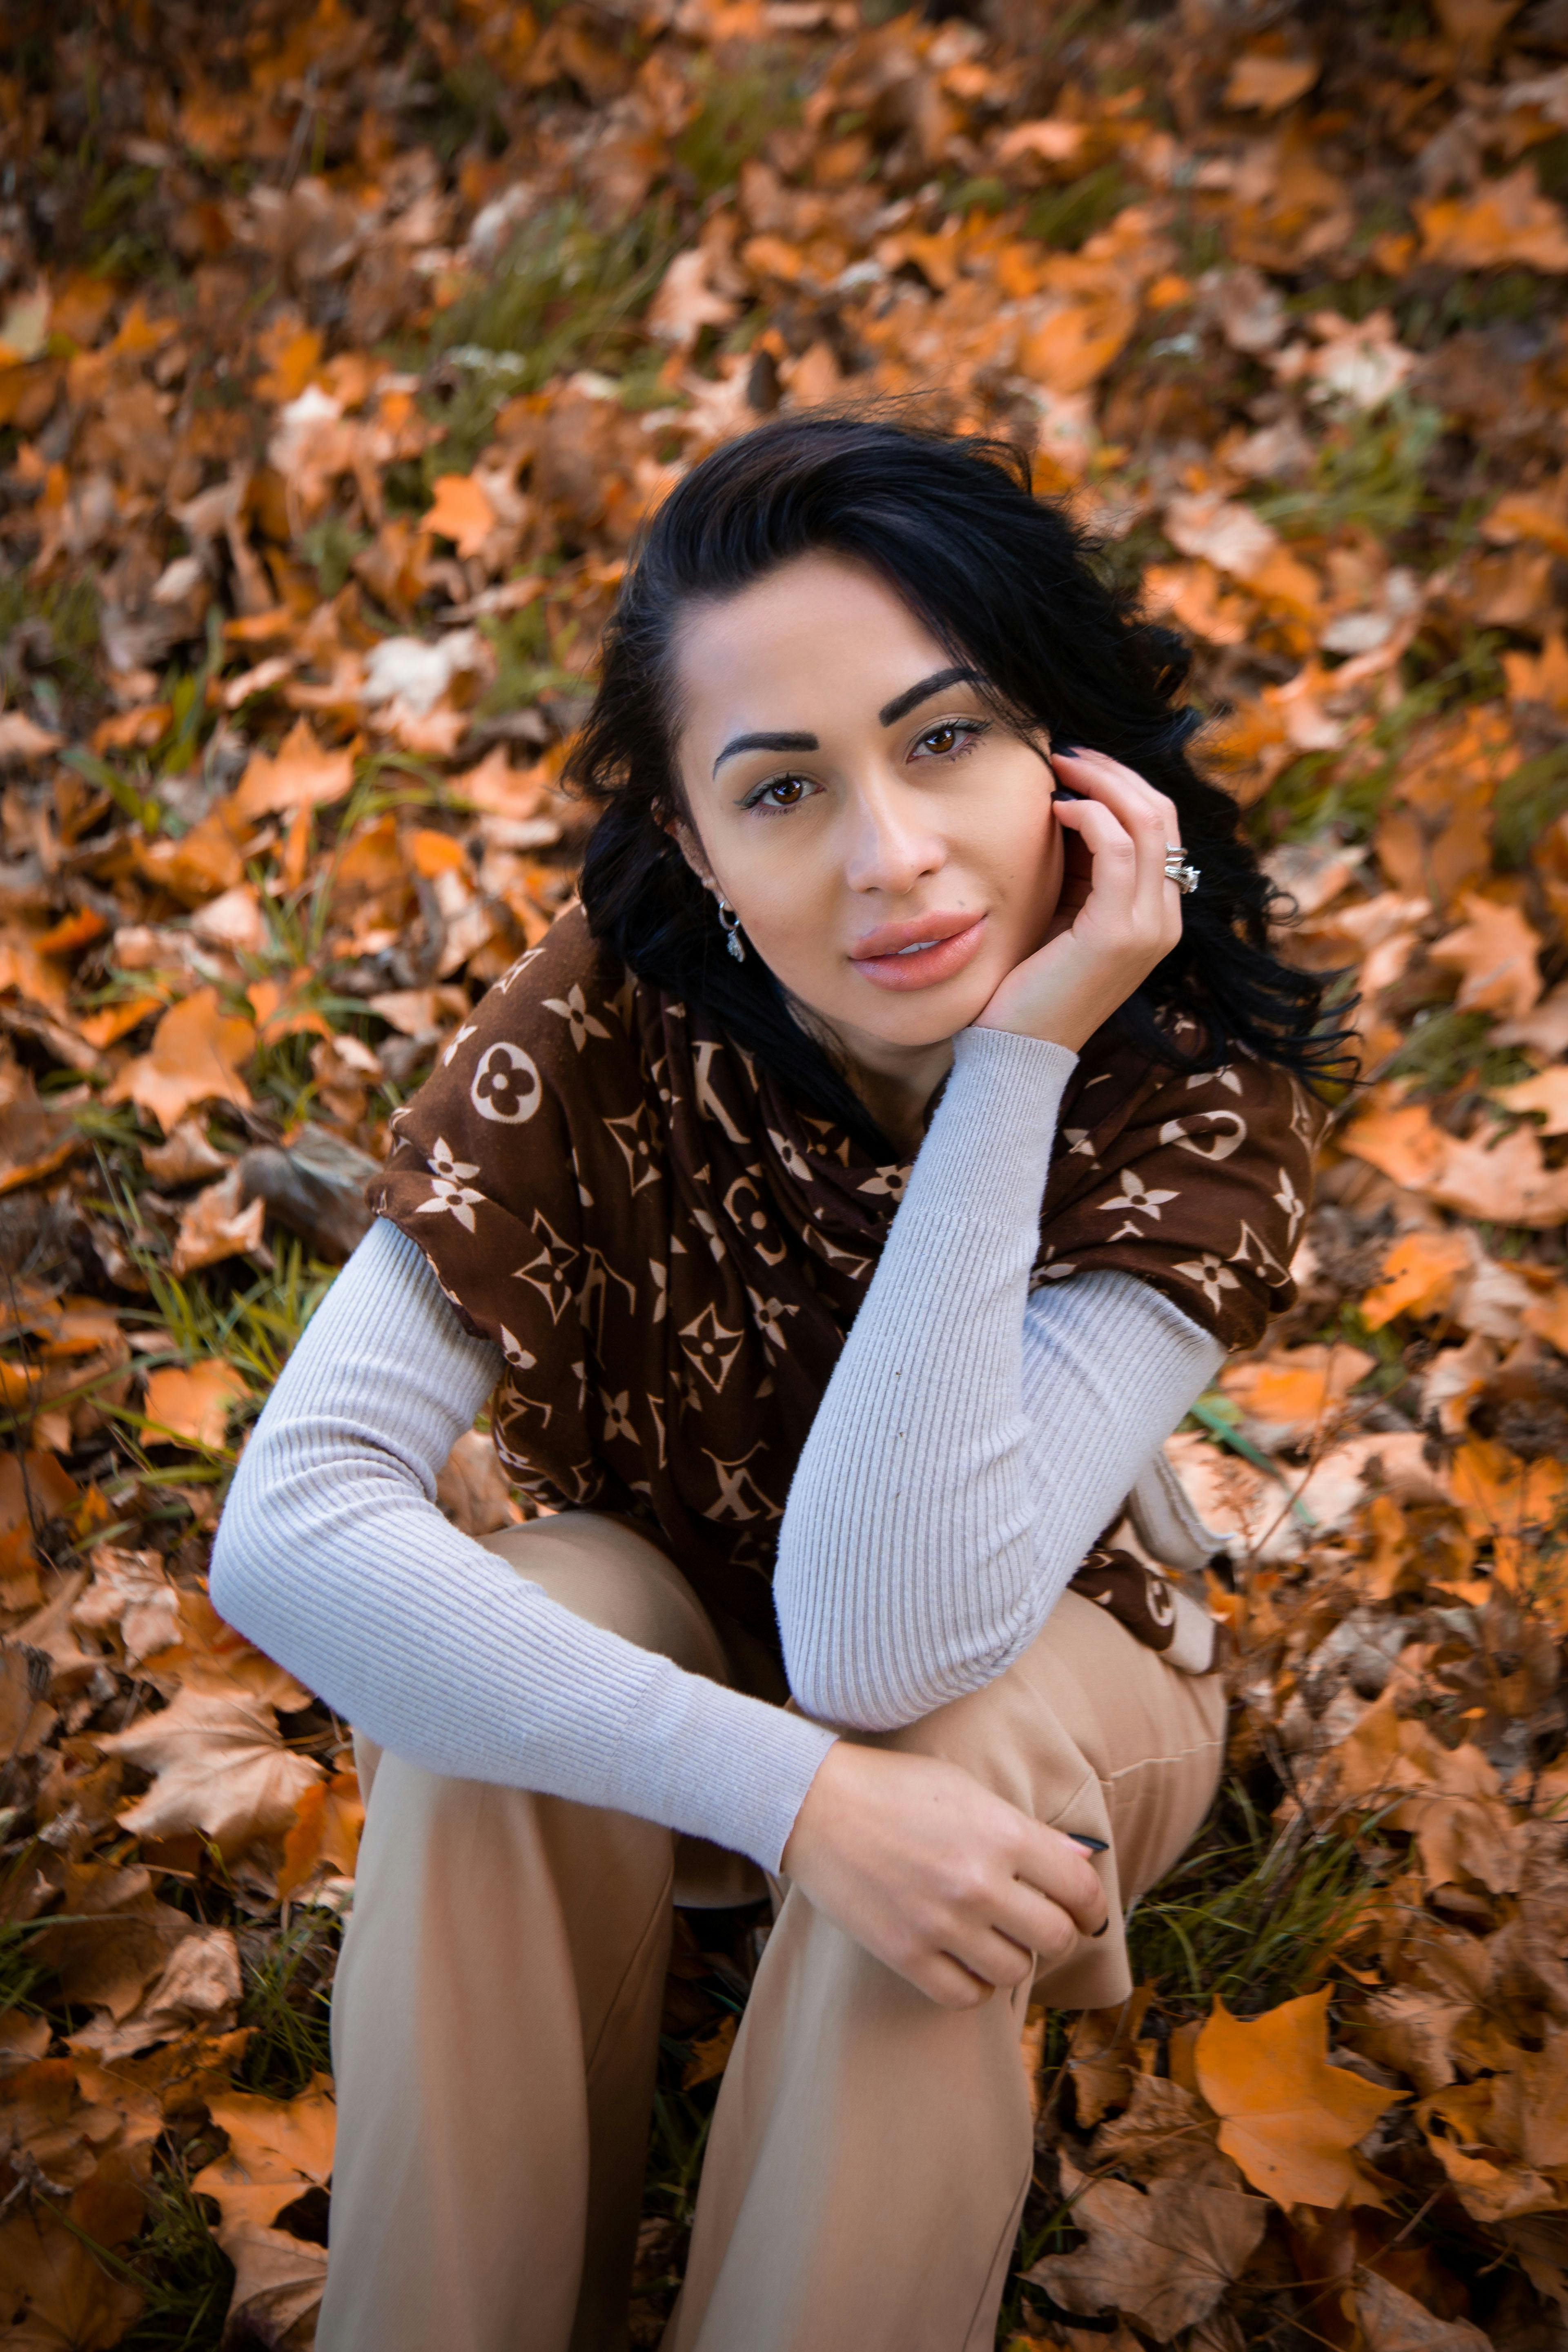 Woman with Louis Vuitton Scarf Sitting on Fallen Leaves · Free Stock Photo